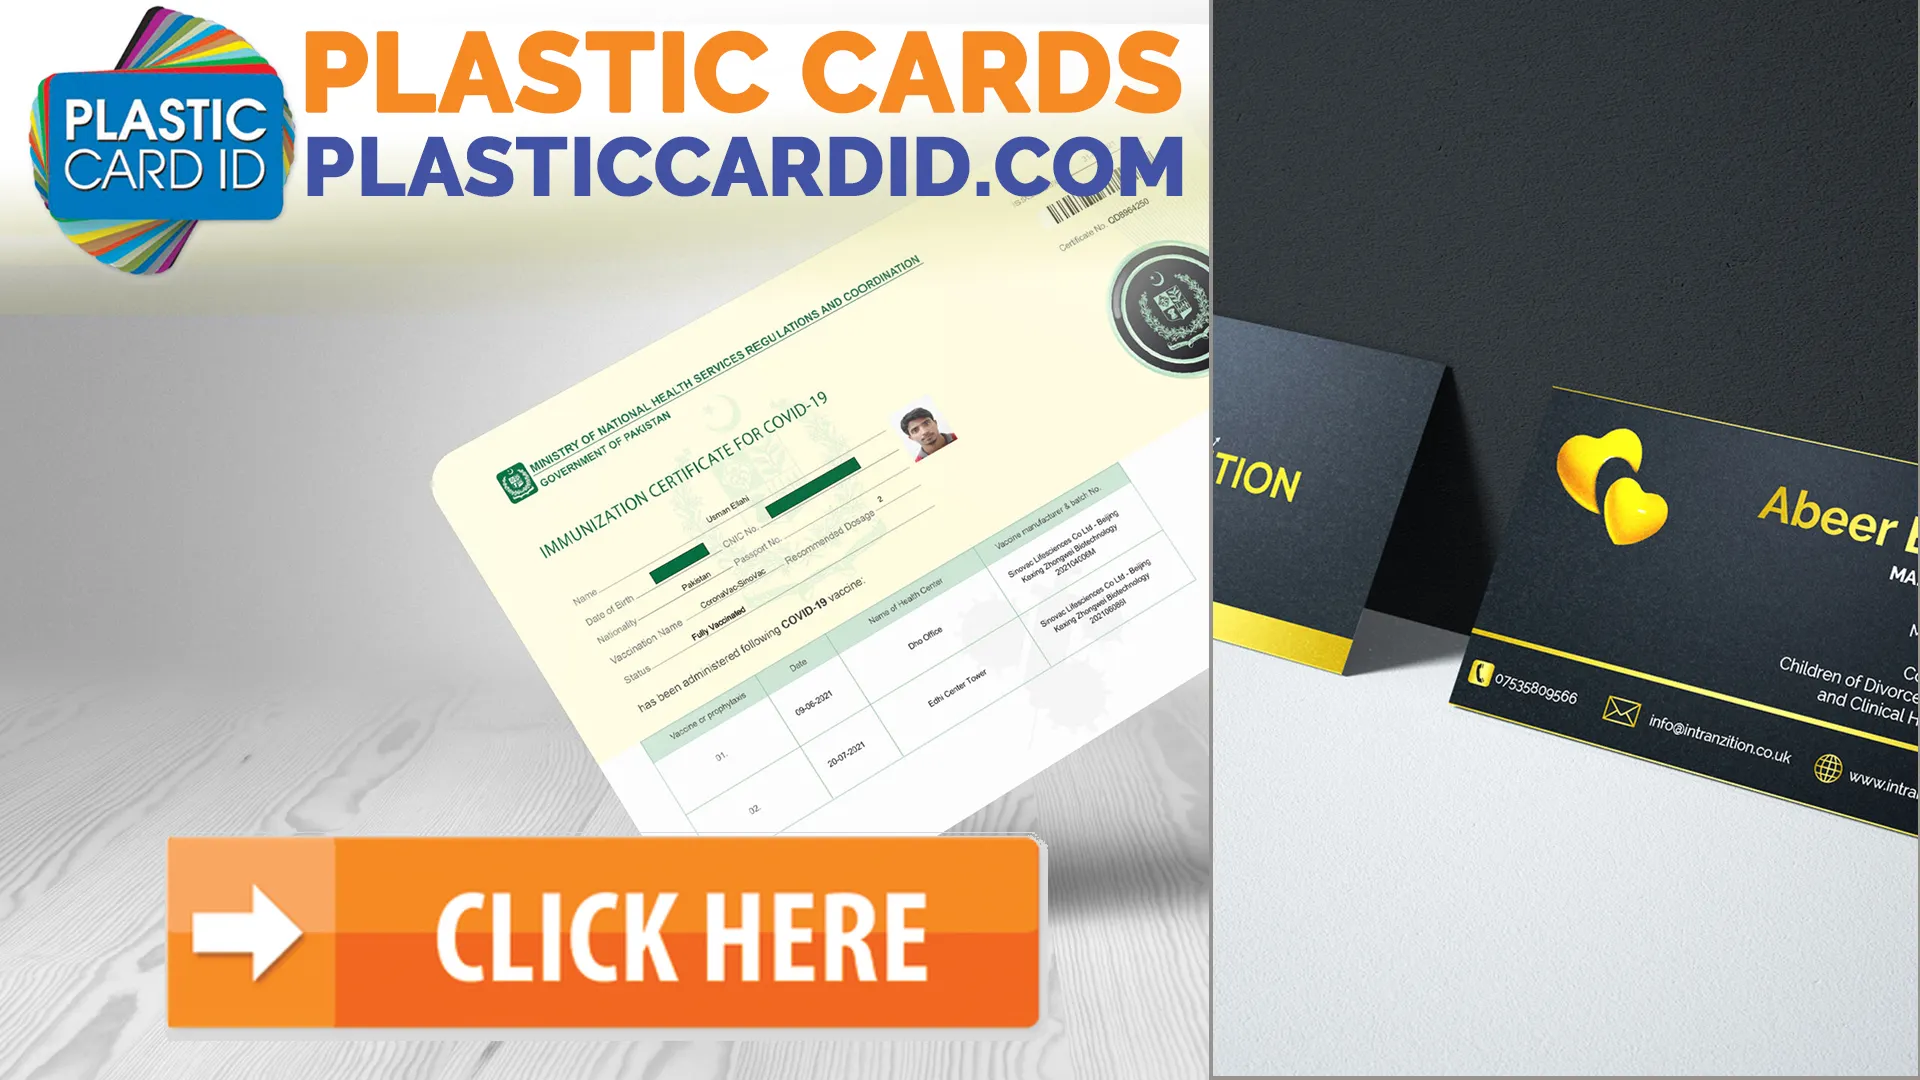 Welcome to the World of Cutting-Edge Plastic Card Design Software